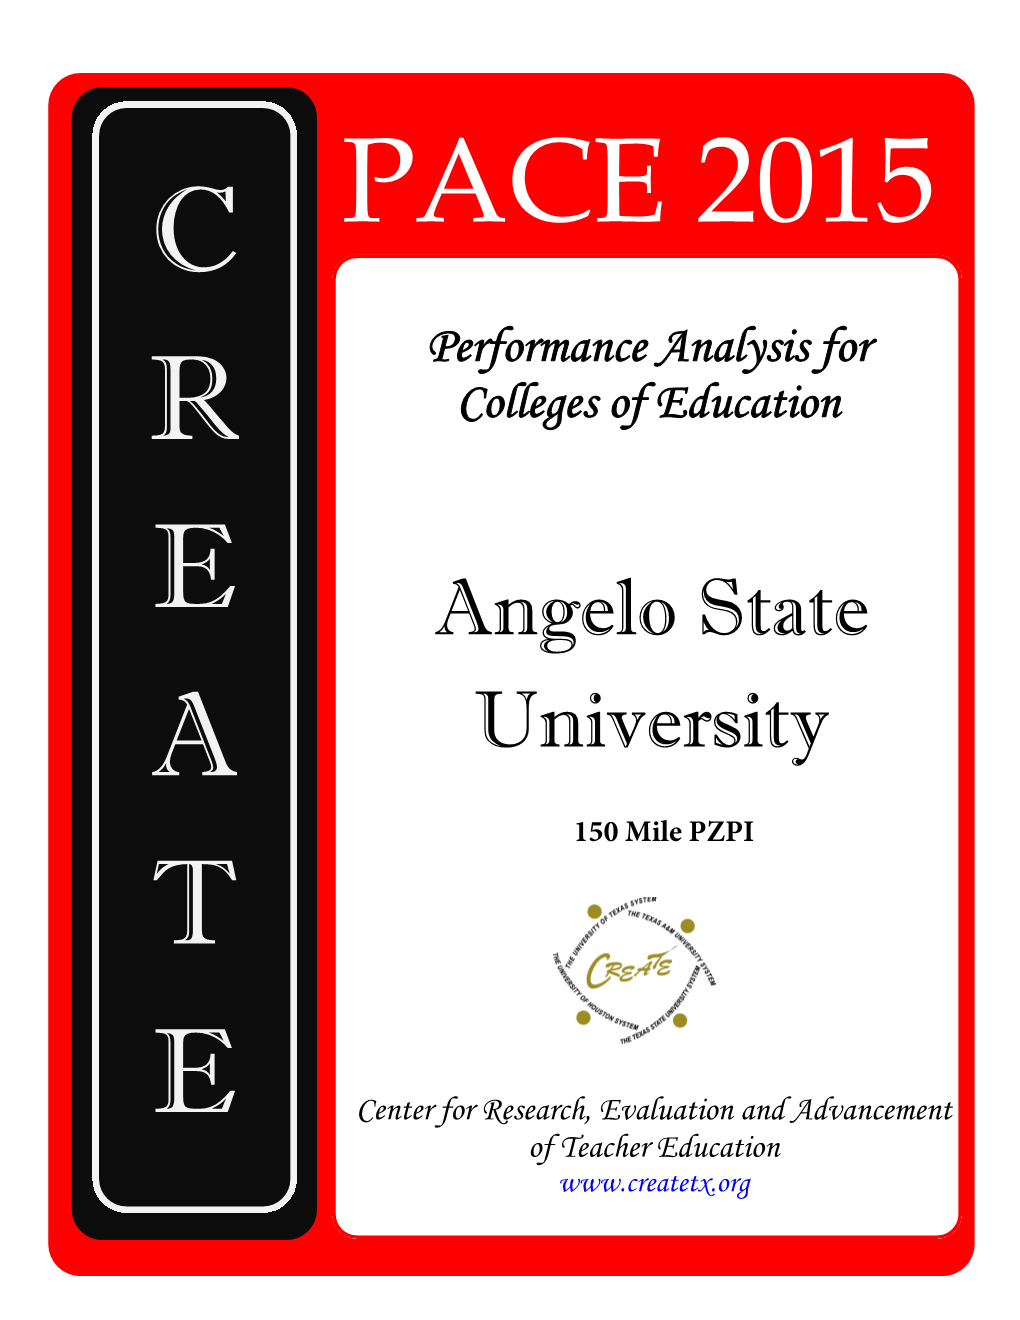 PACE 2015 Performance Analysis for R Colleges of Education